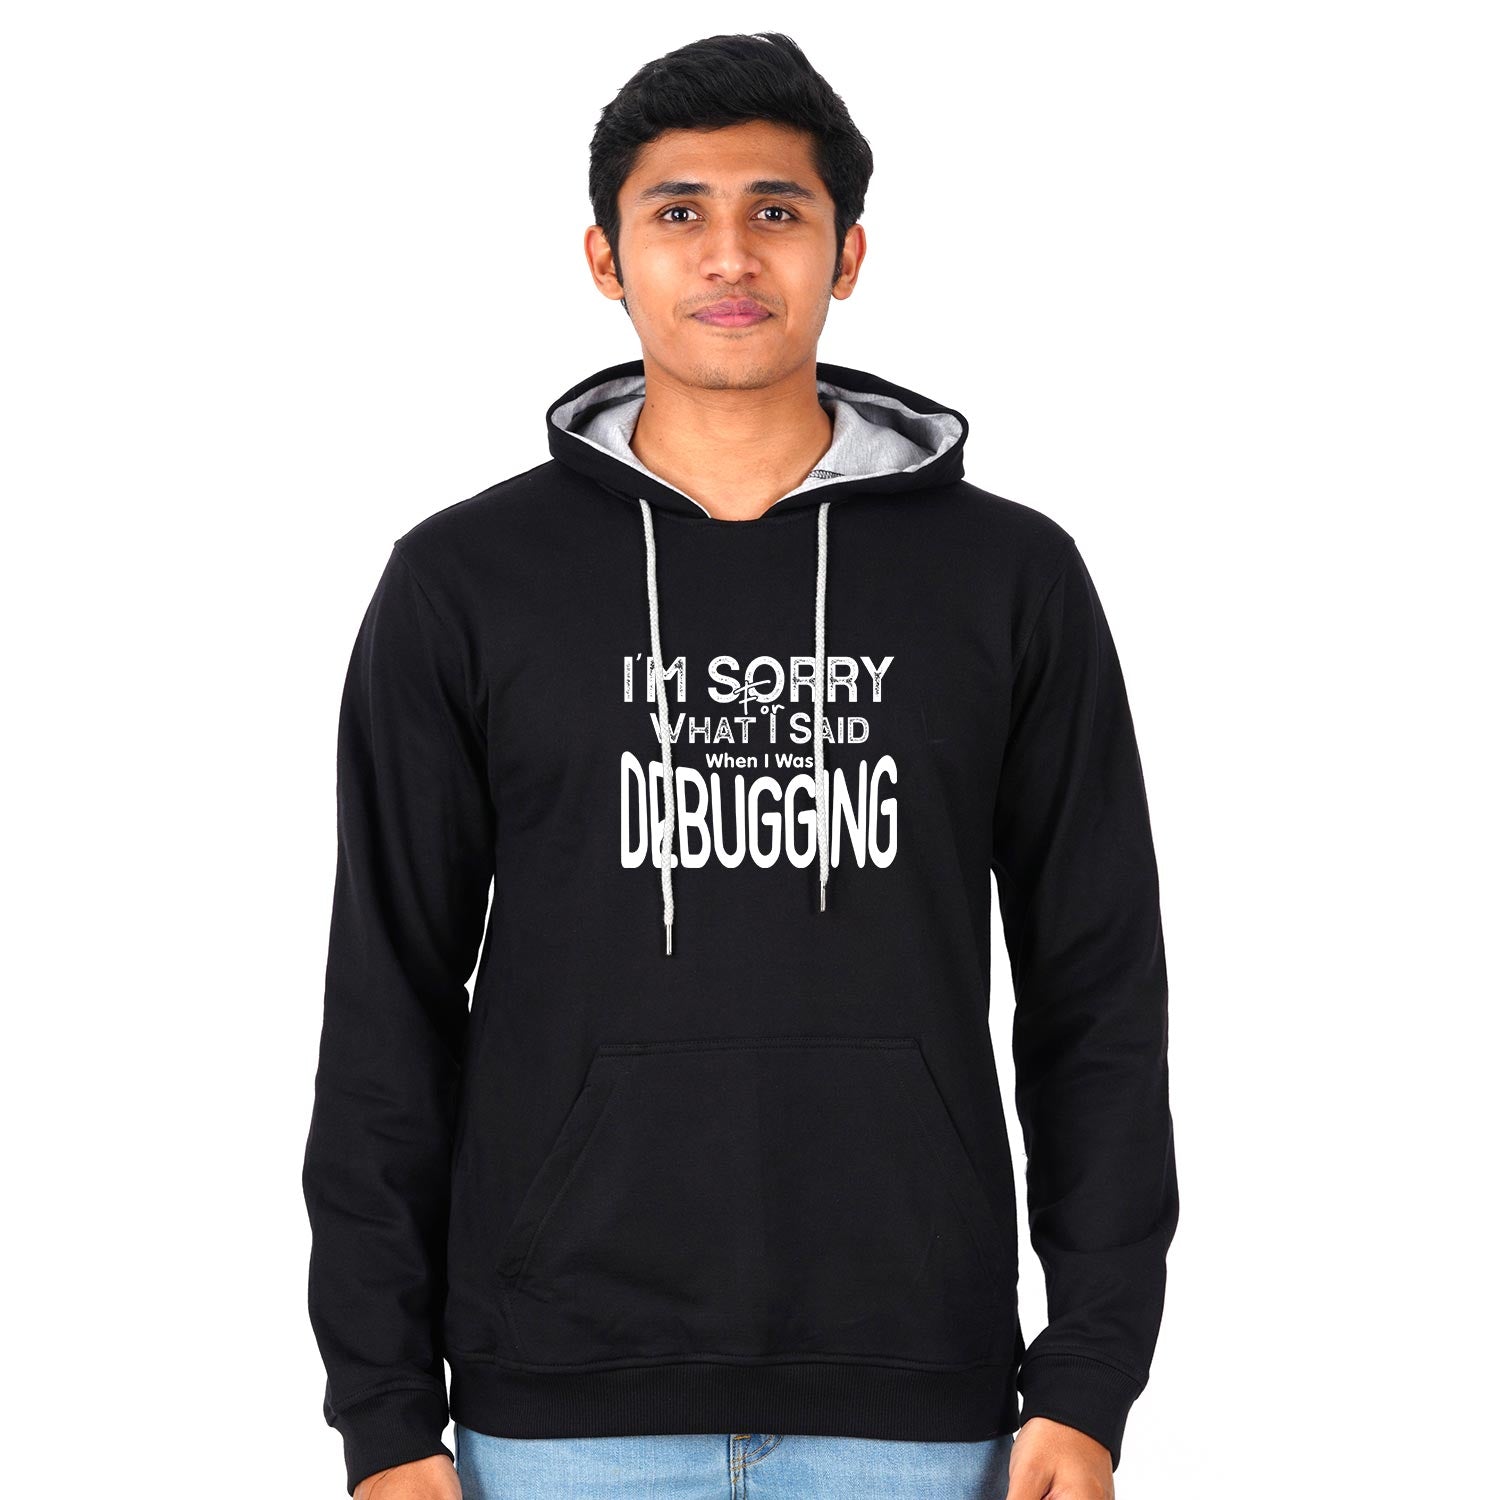 I Am Sorry For What I Said  When I Was Debugging Unisex Hoodie